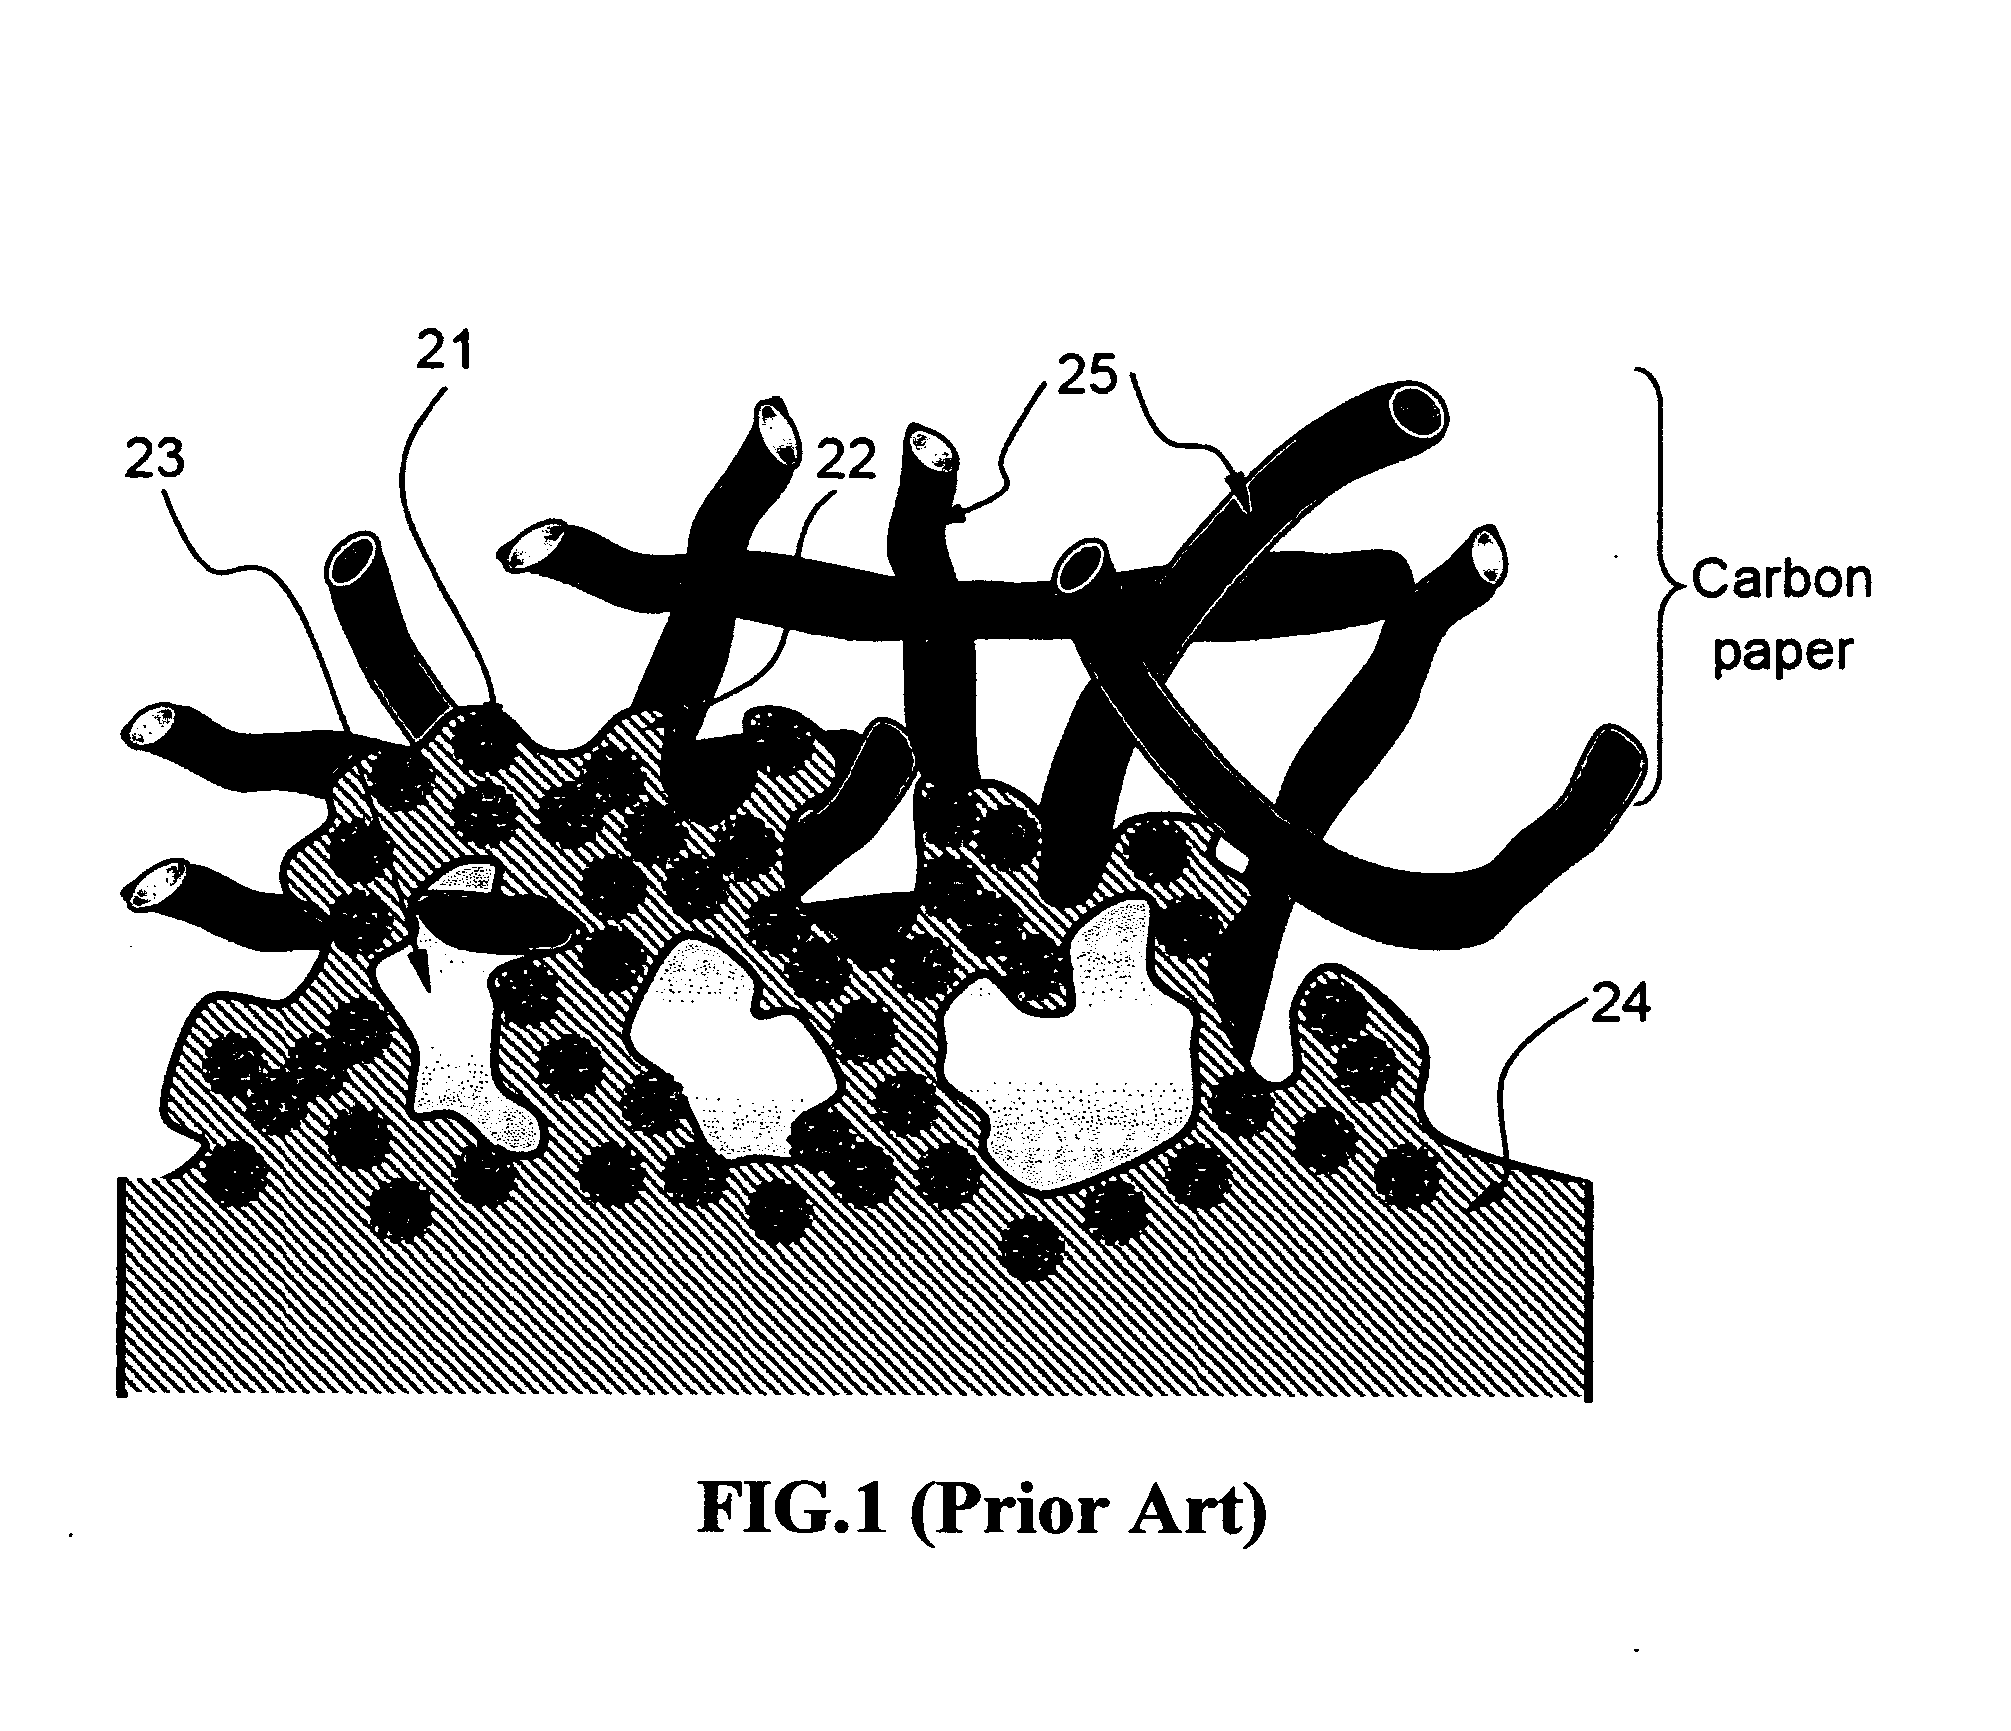 Electro-catalyst compositions for fuel cells